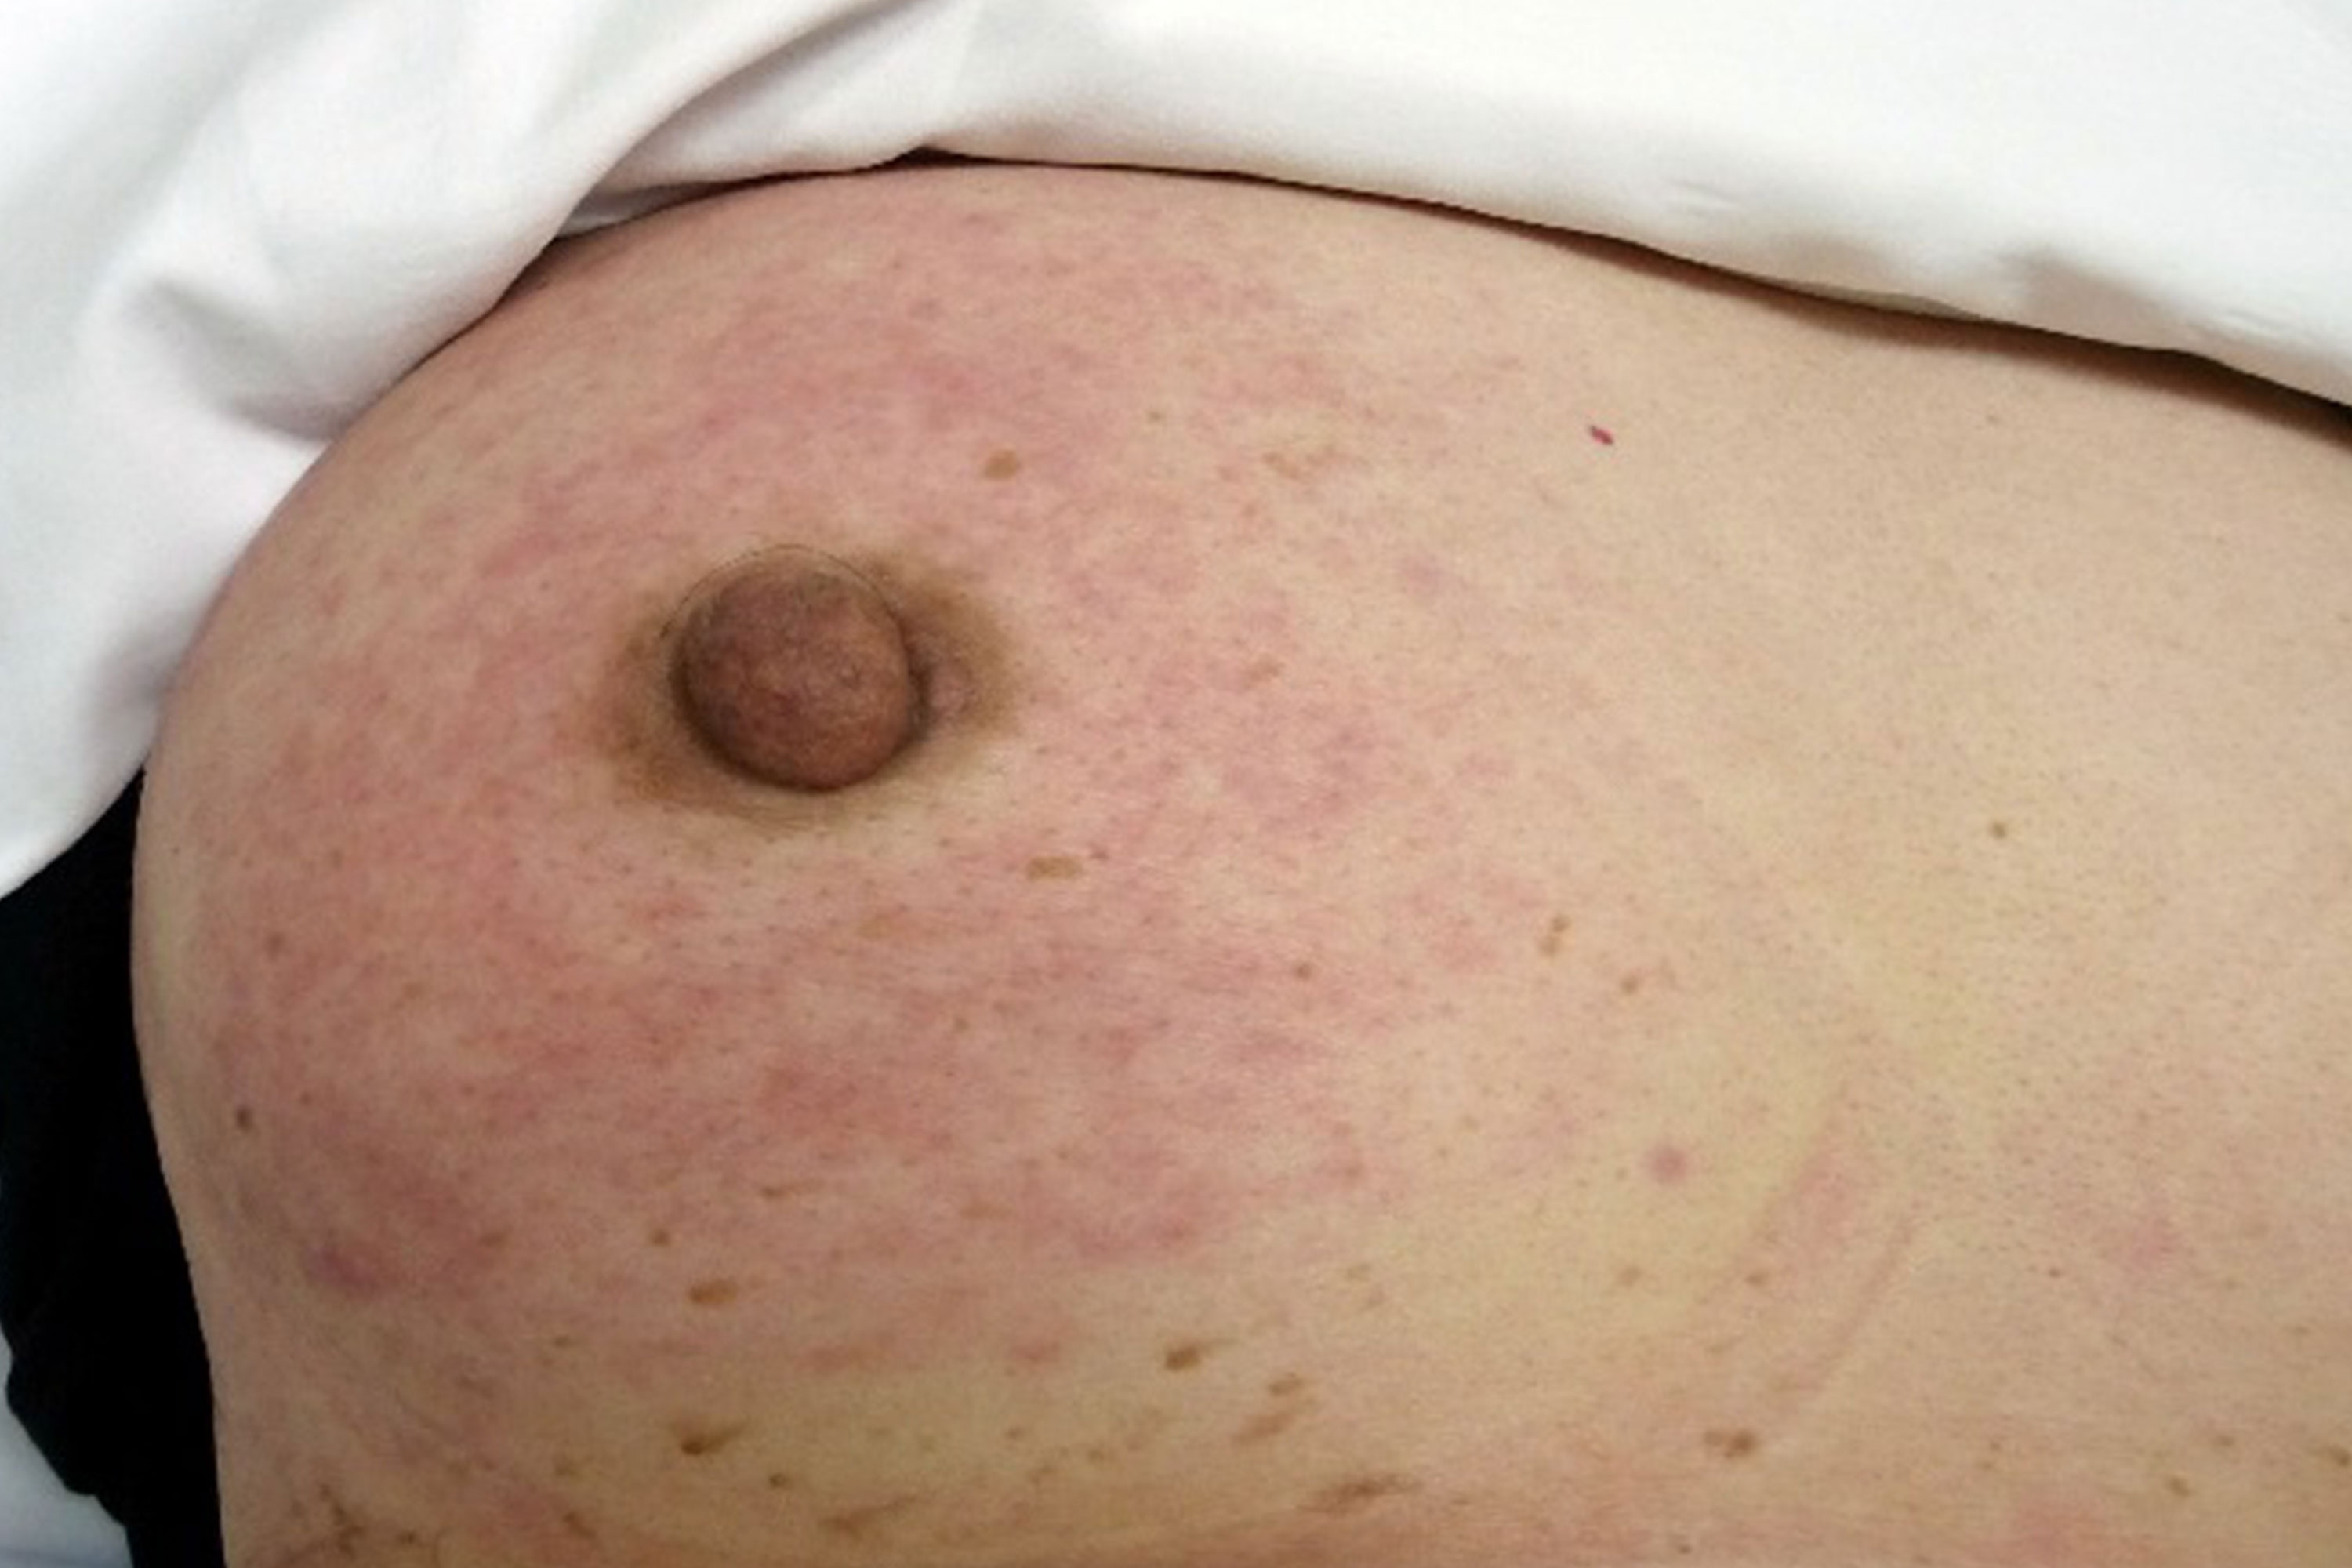 Red lump on breast